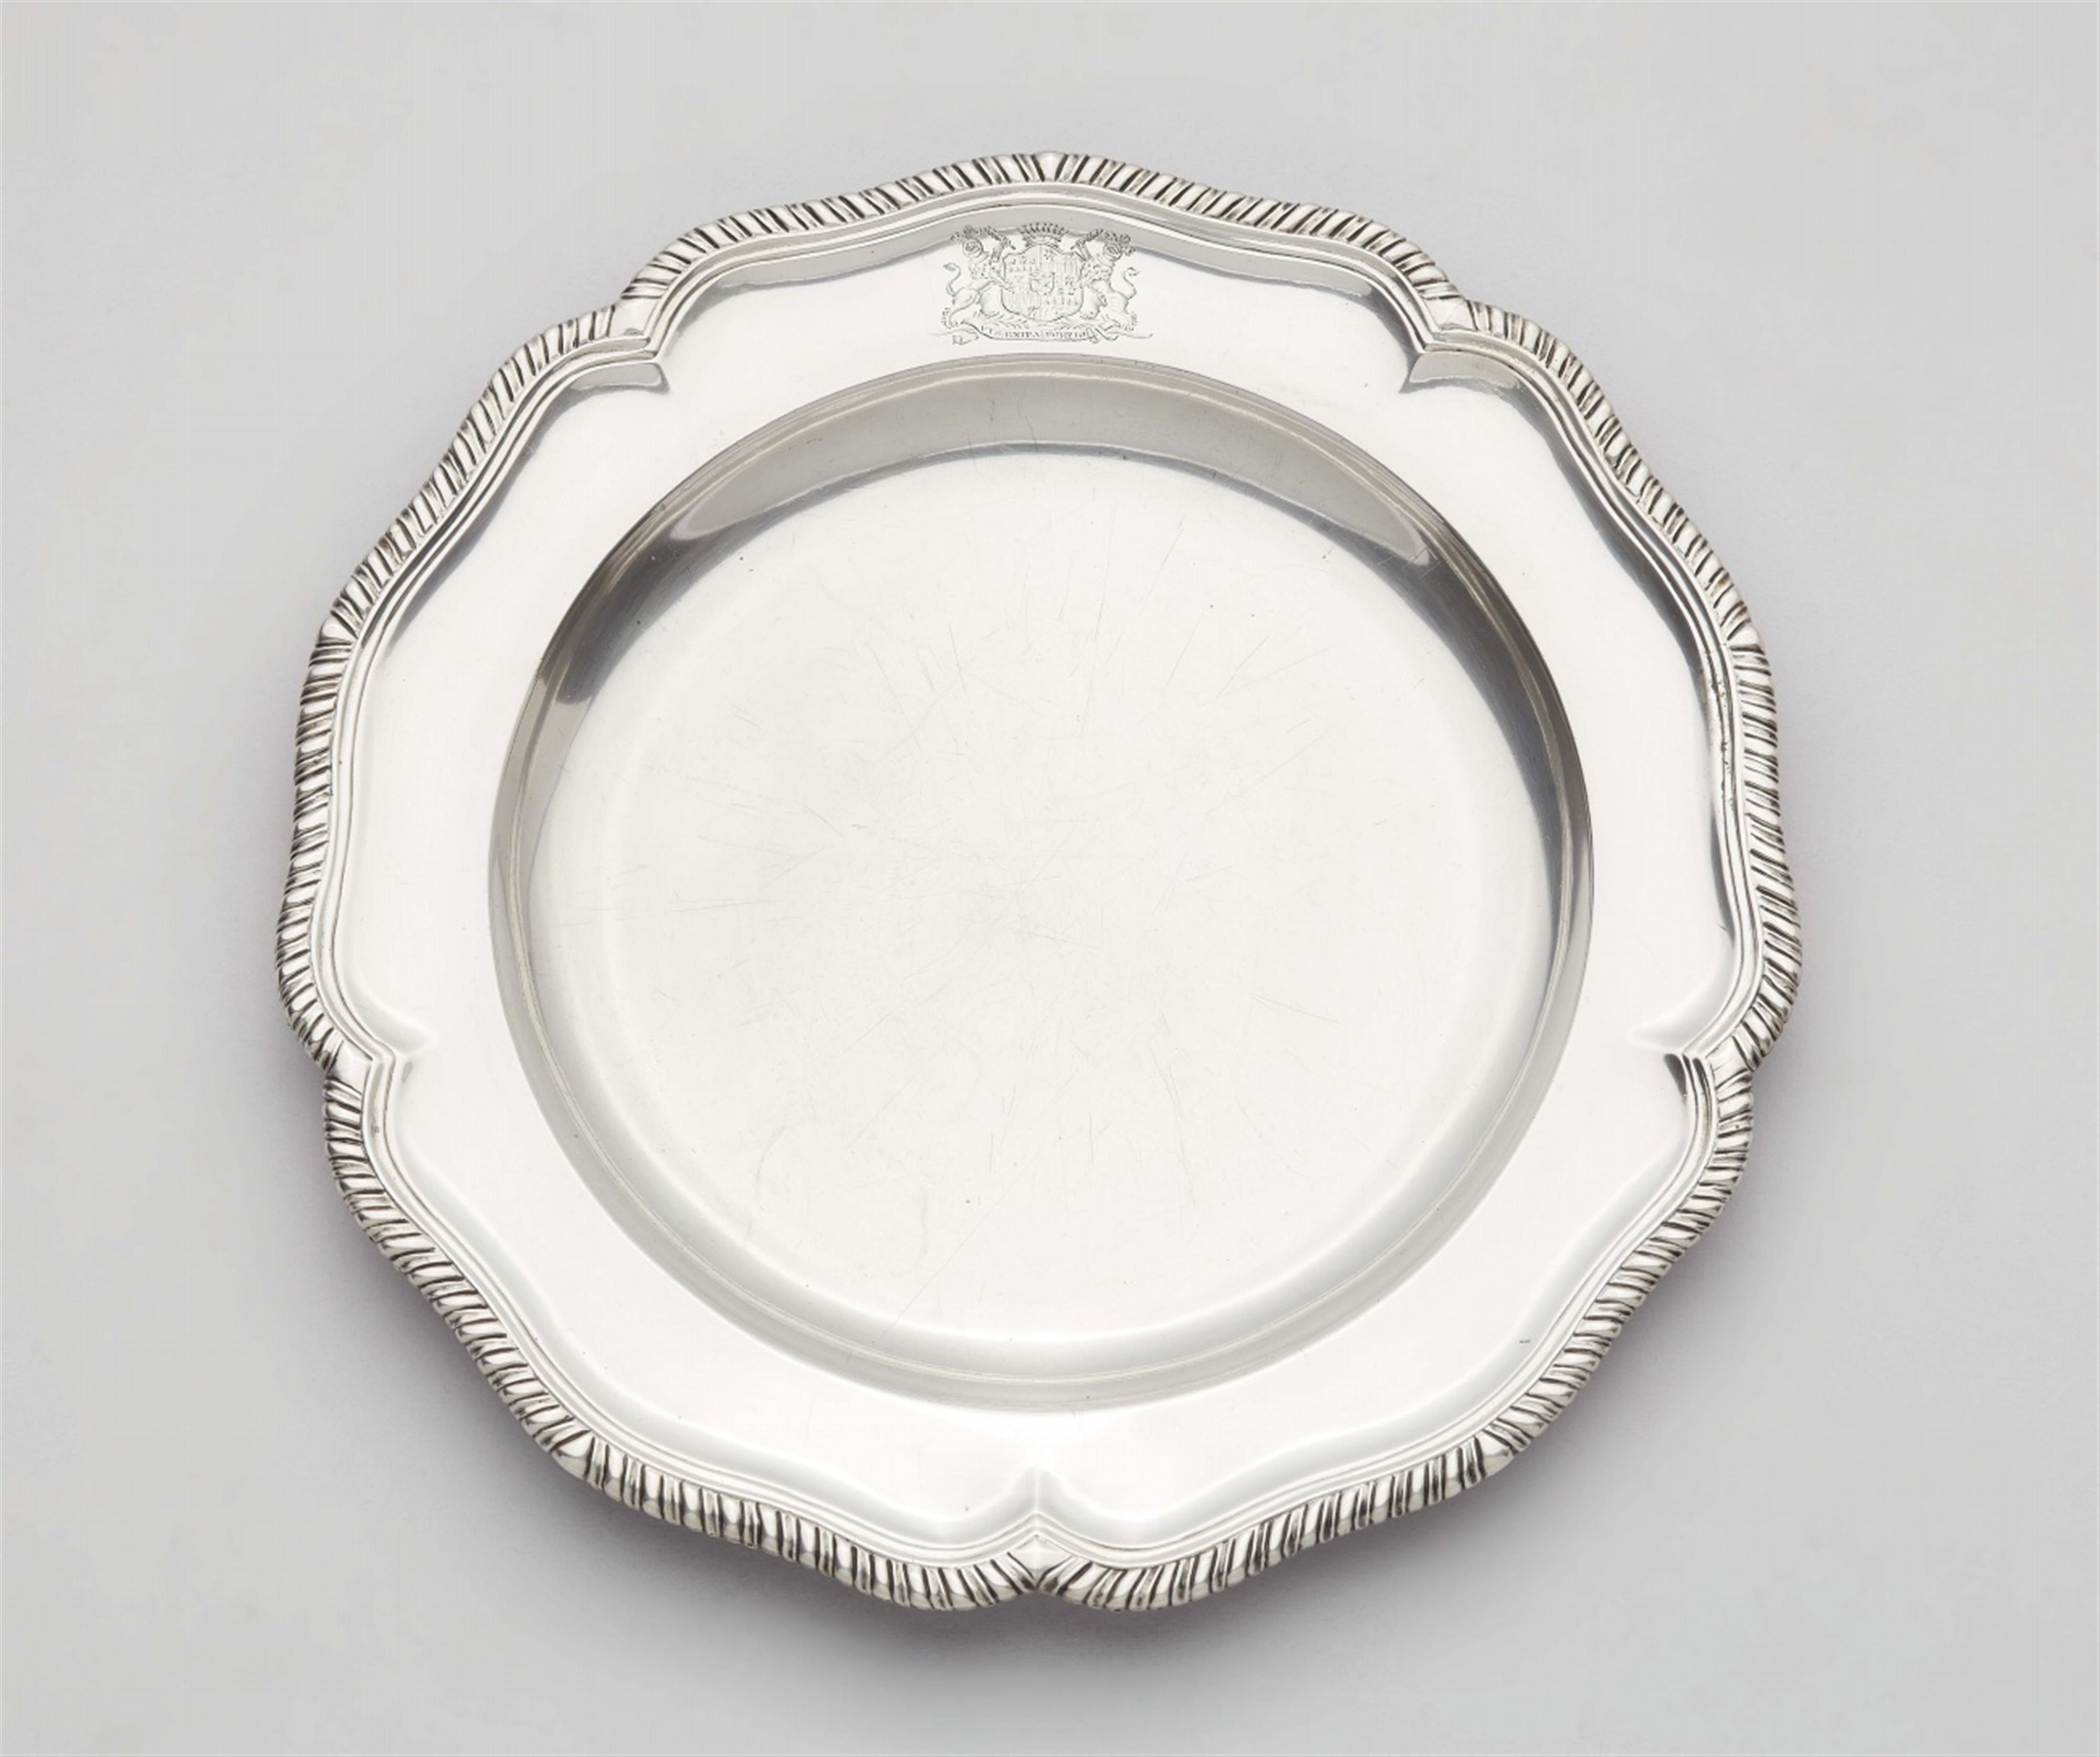 An Augsburg silver plate - image-1